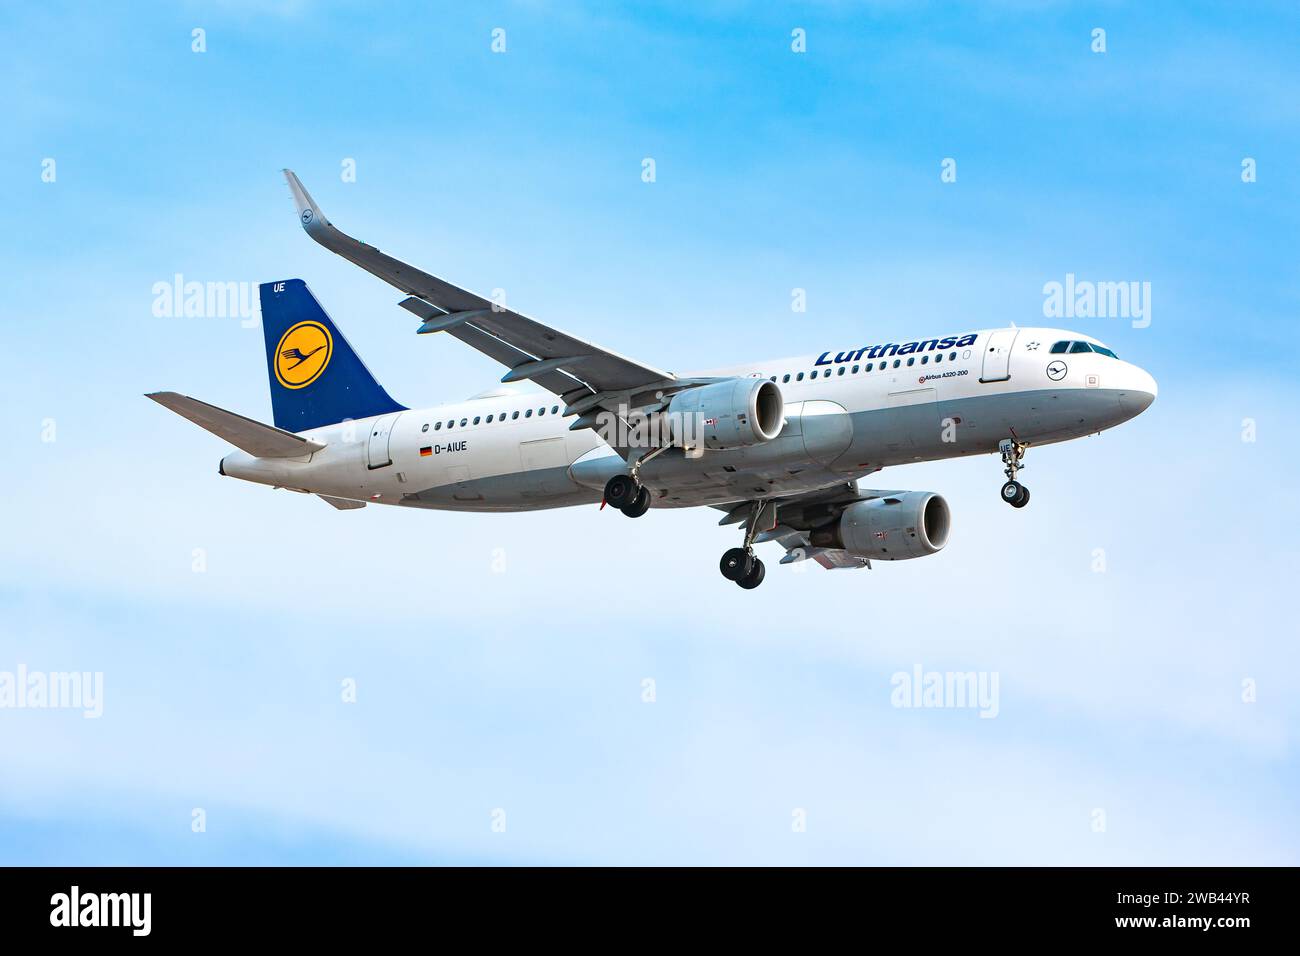 Boryspil, Ukraine - February 10, 2020: Airplane Airbus A320-214 (D-AIUE) of Lufthansa is landing at Boryspil airport Stock Photo